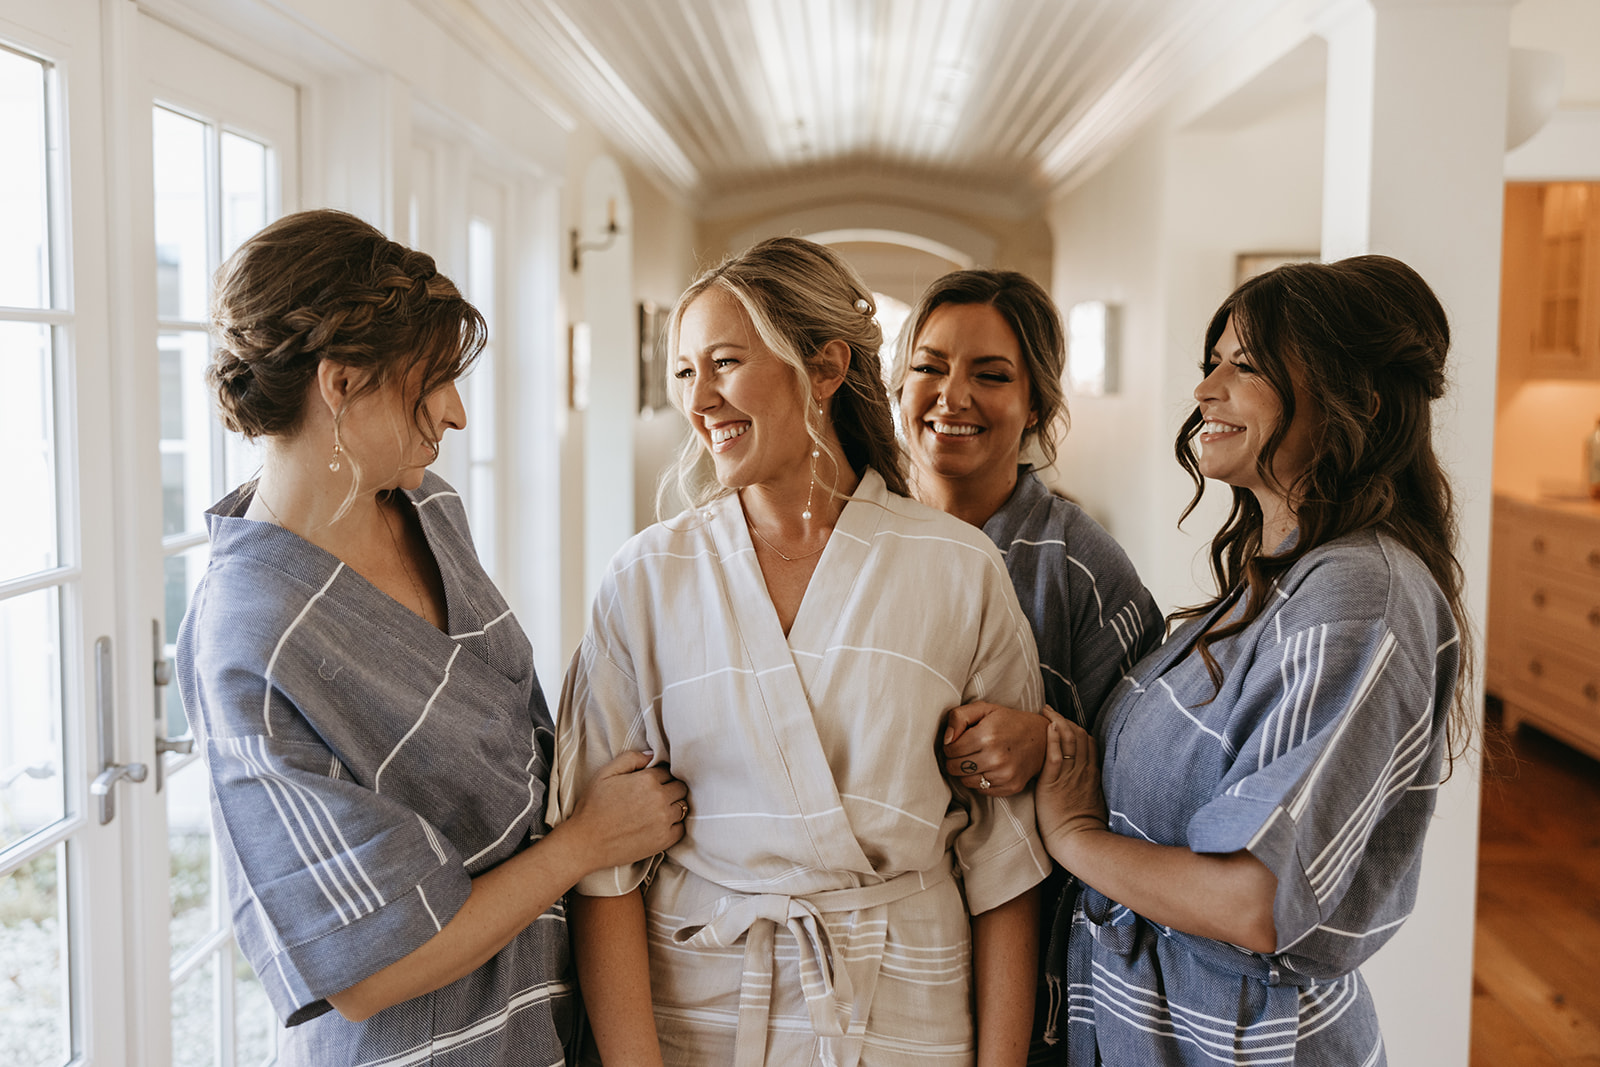 bridal party getting ready | The Penny: A Downtown Wedding Venue in San Luis Obispo